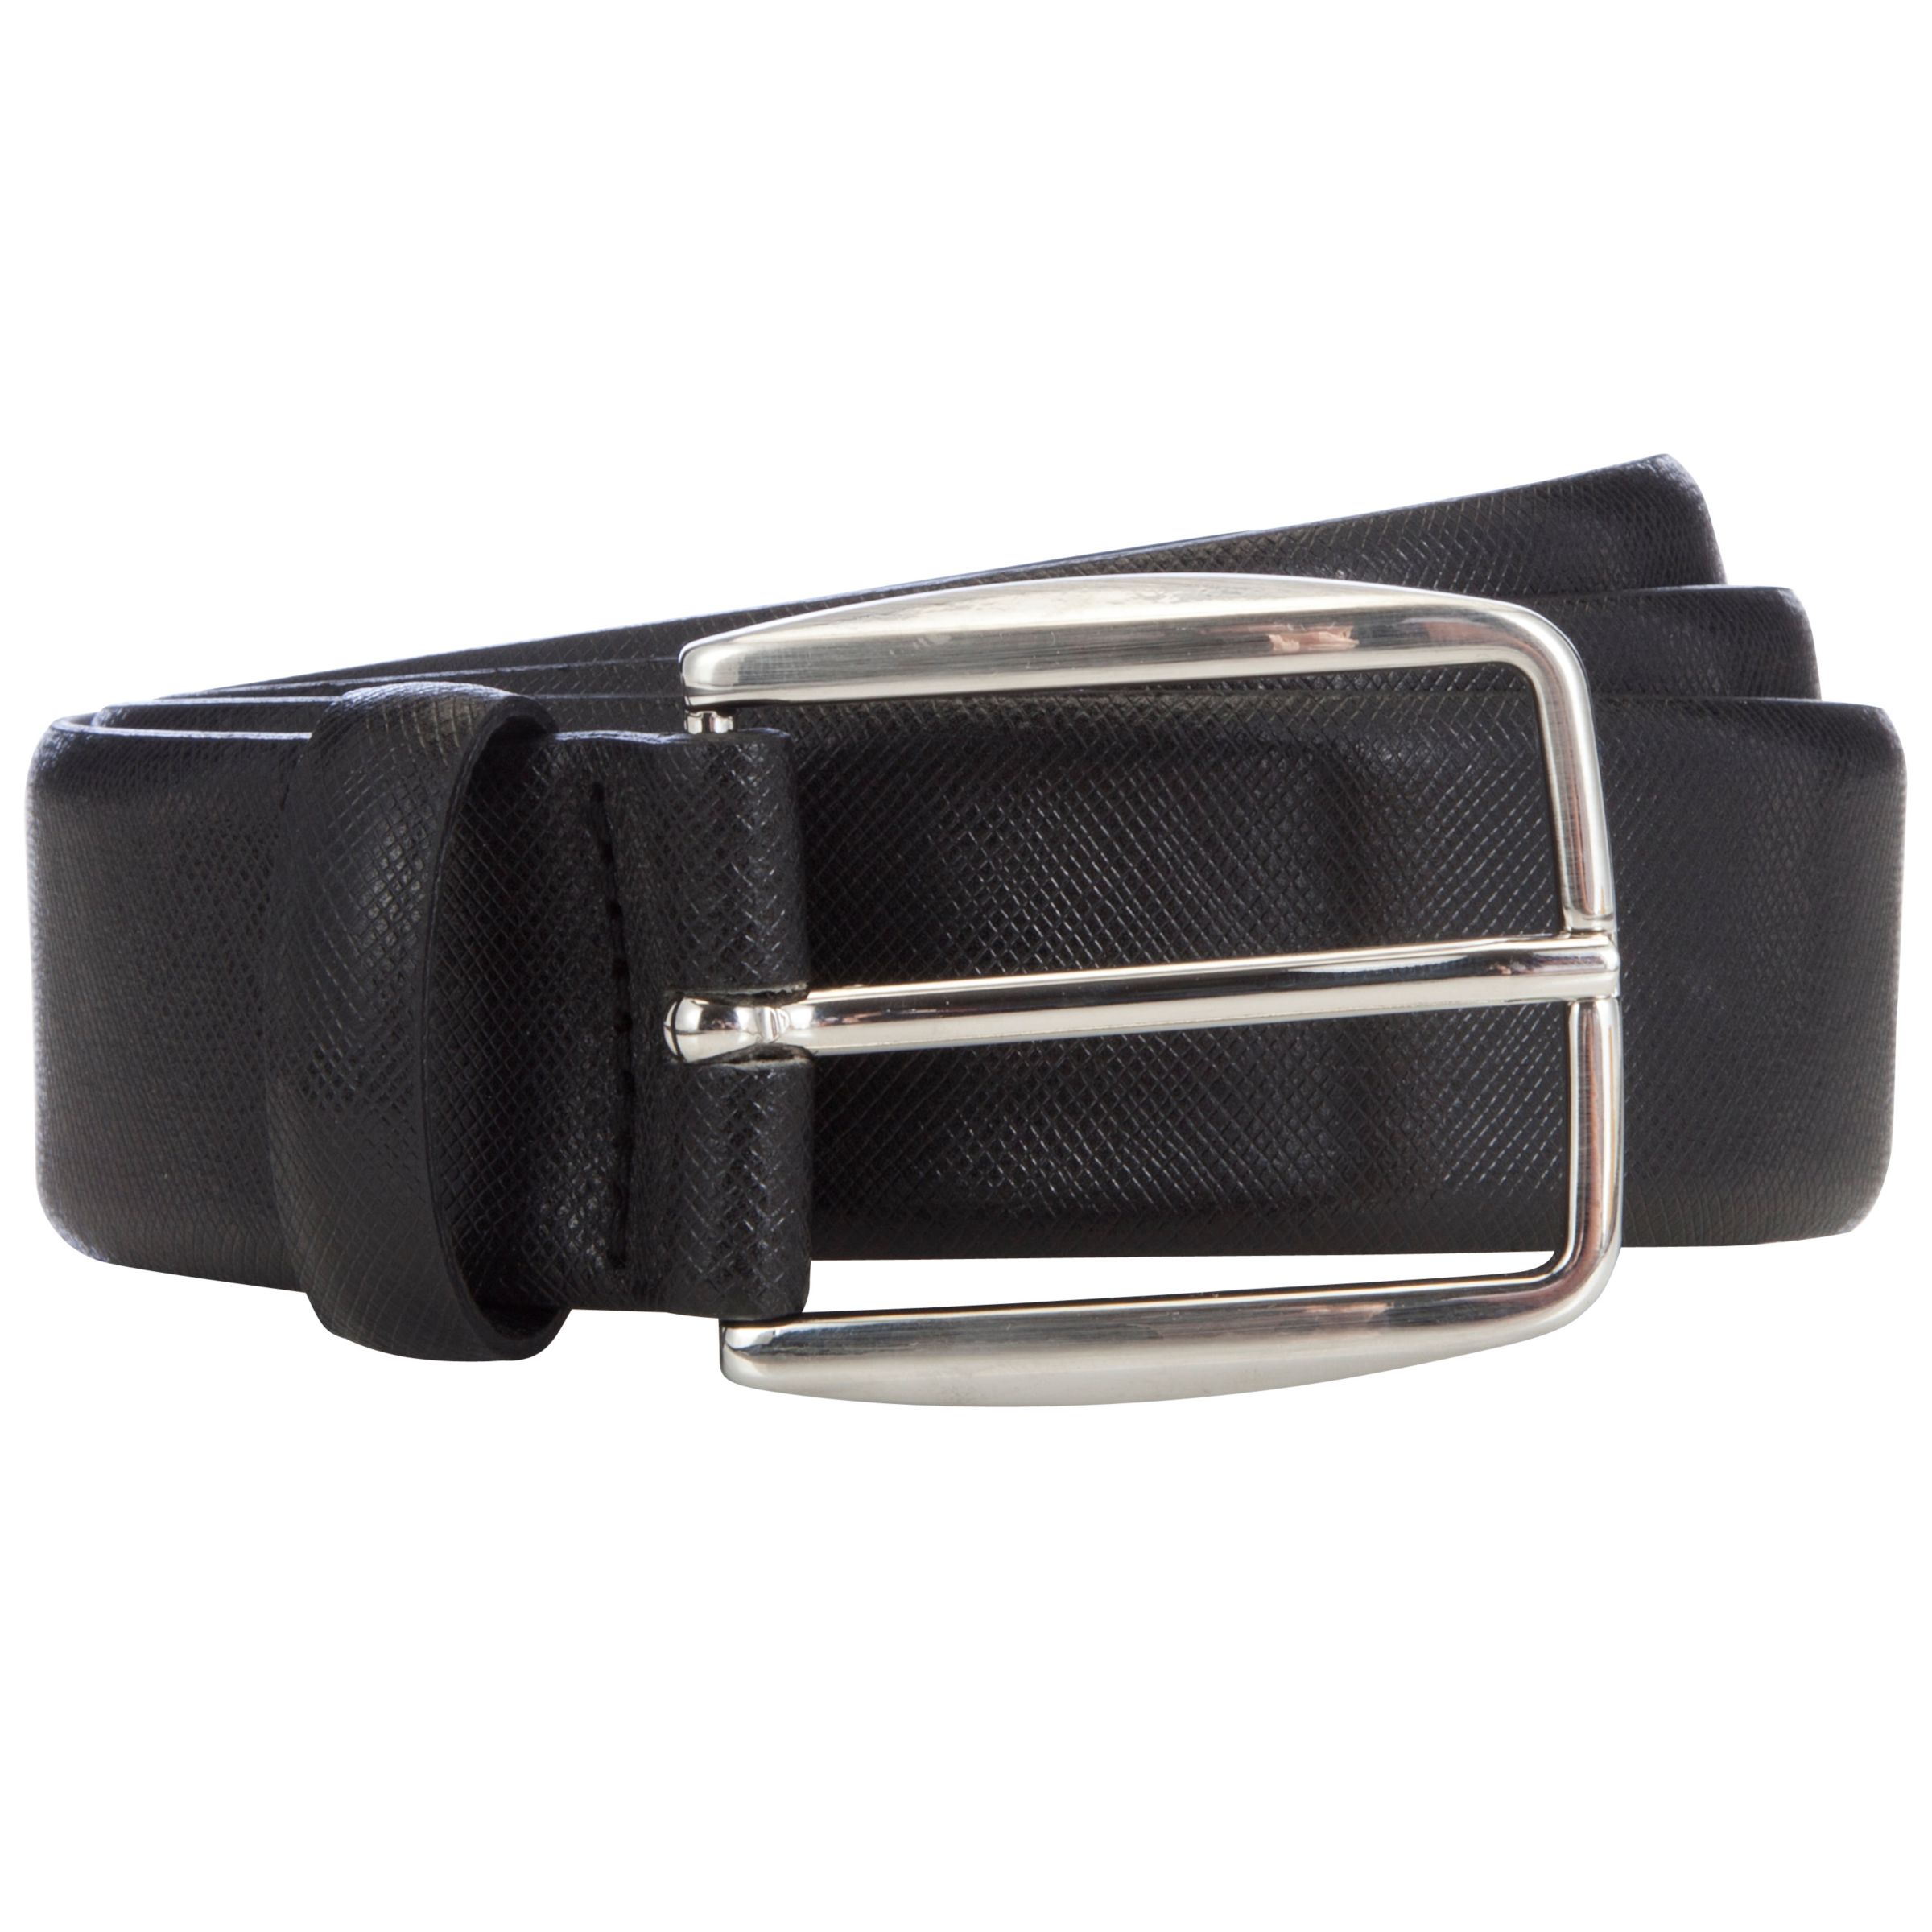 John Lewis & Partners Made in Italy Textured Leather Belt, Black, M